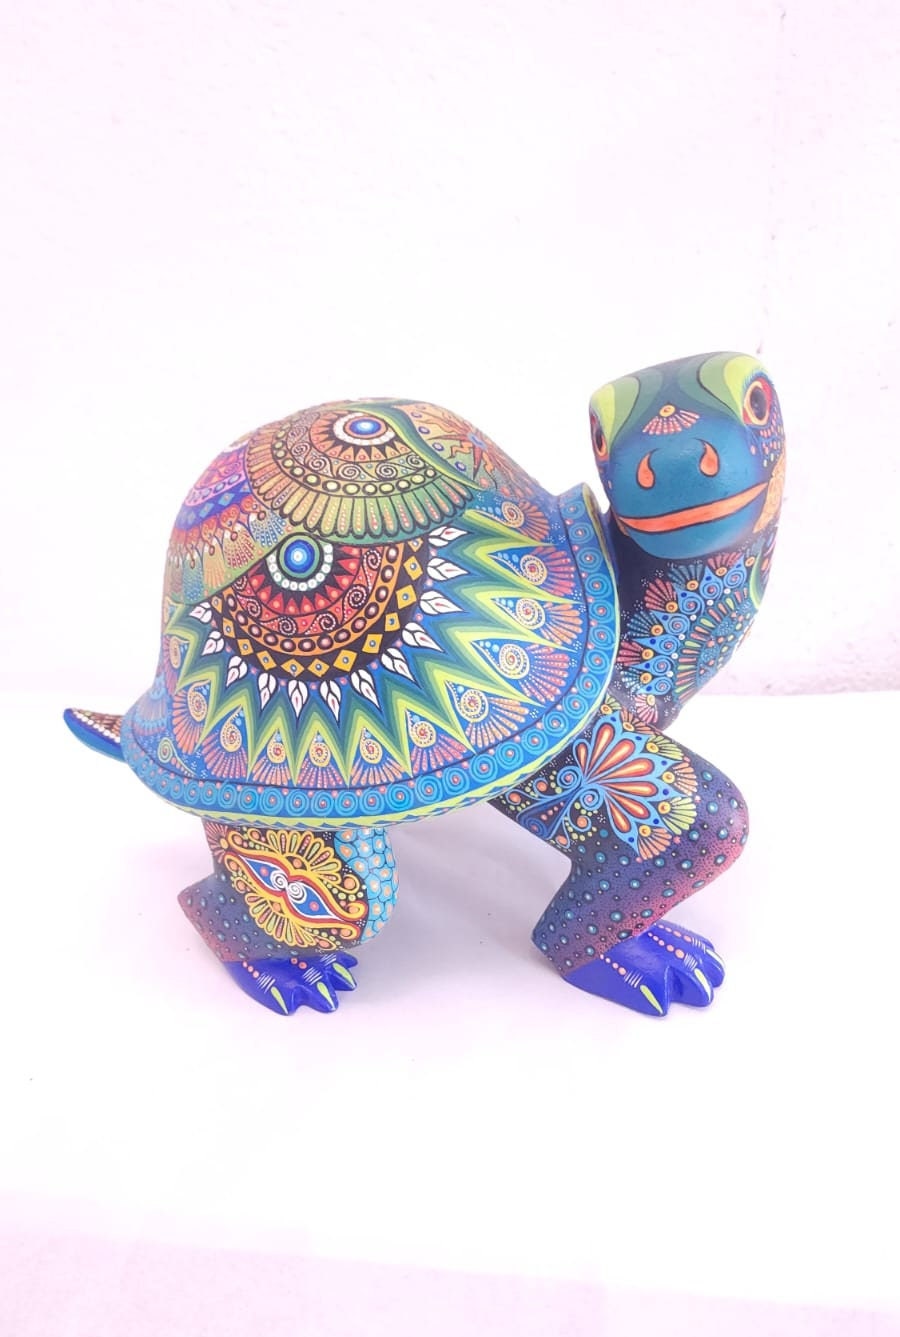 Oaxacan Carving Northern Lights Oso Artist - Eleazar Morales